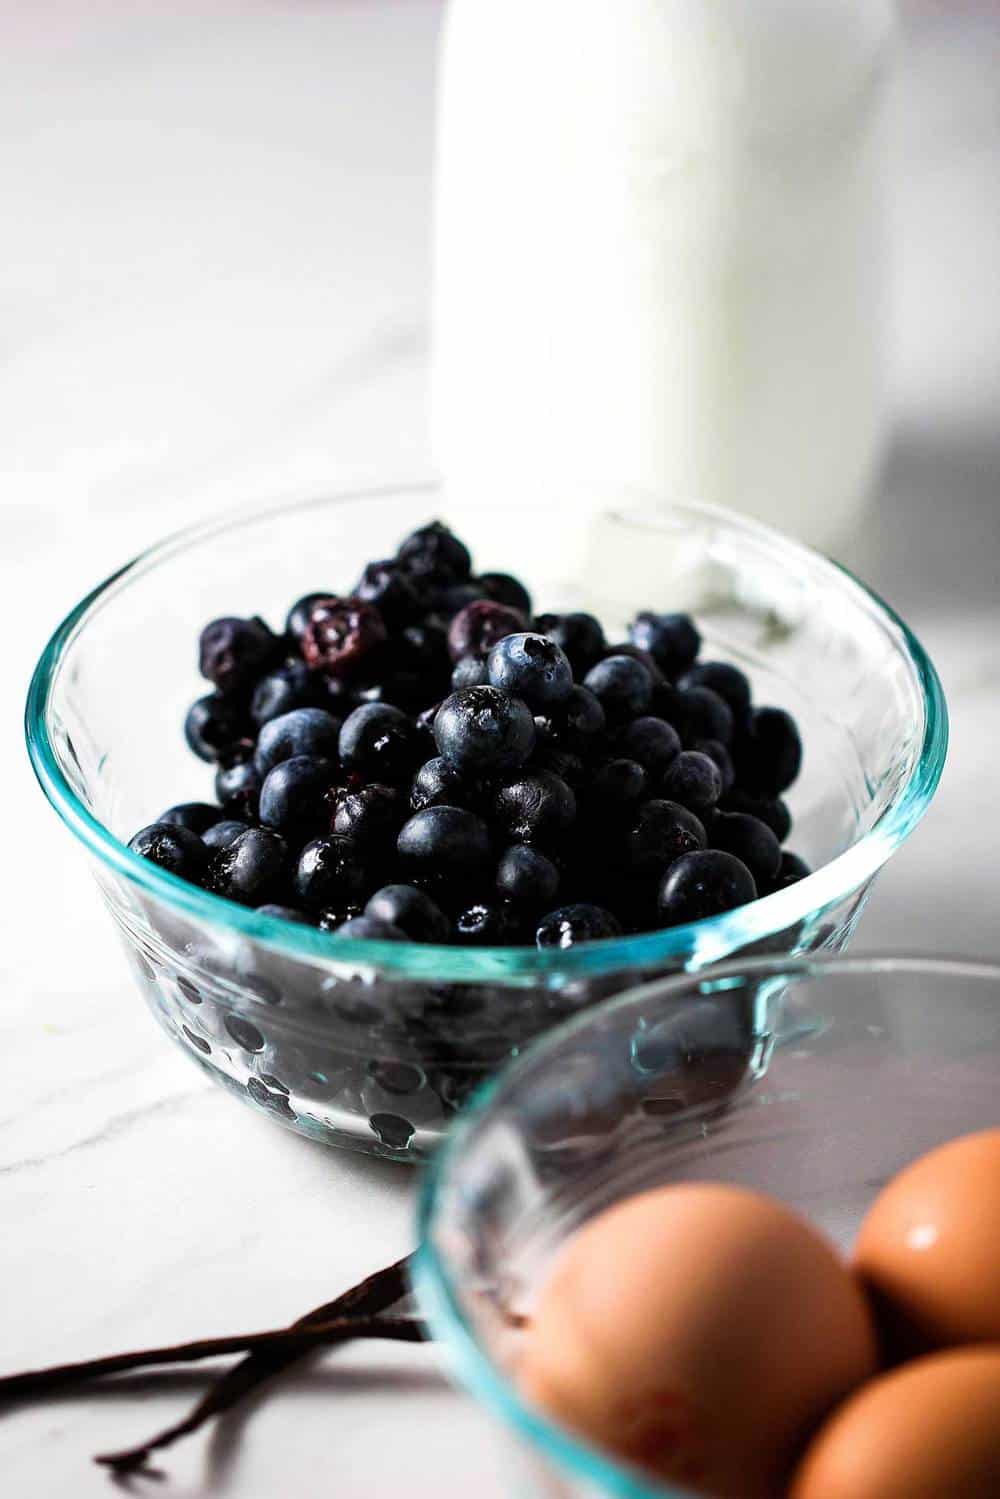 Blueberries in a clear bowl with eggs nearby